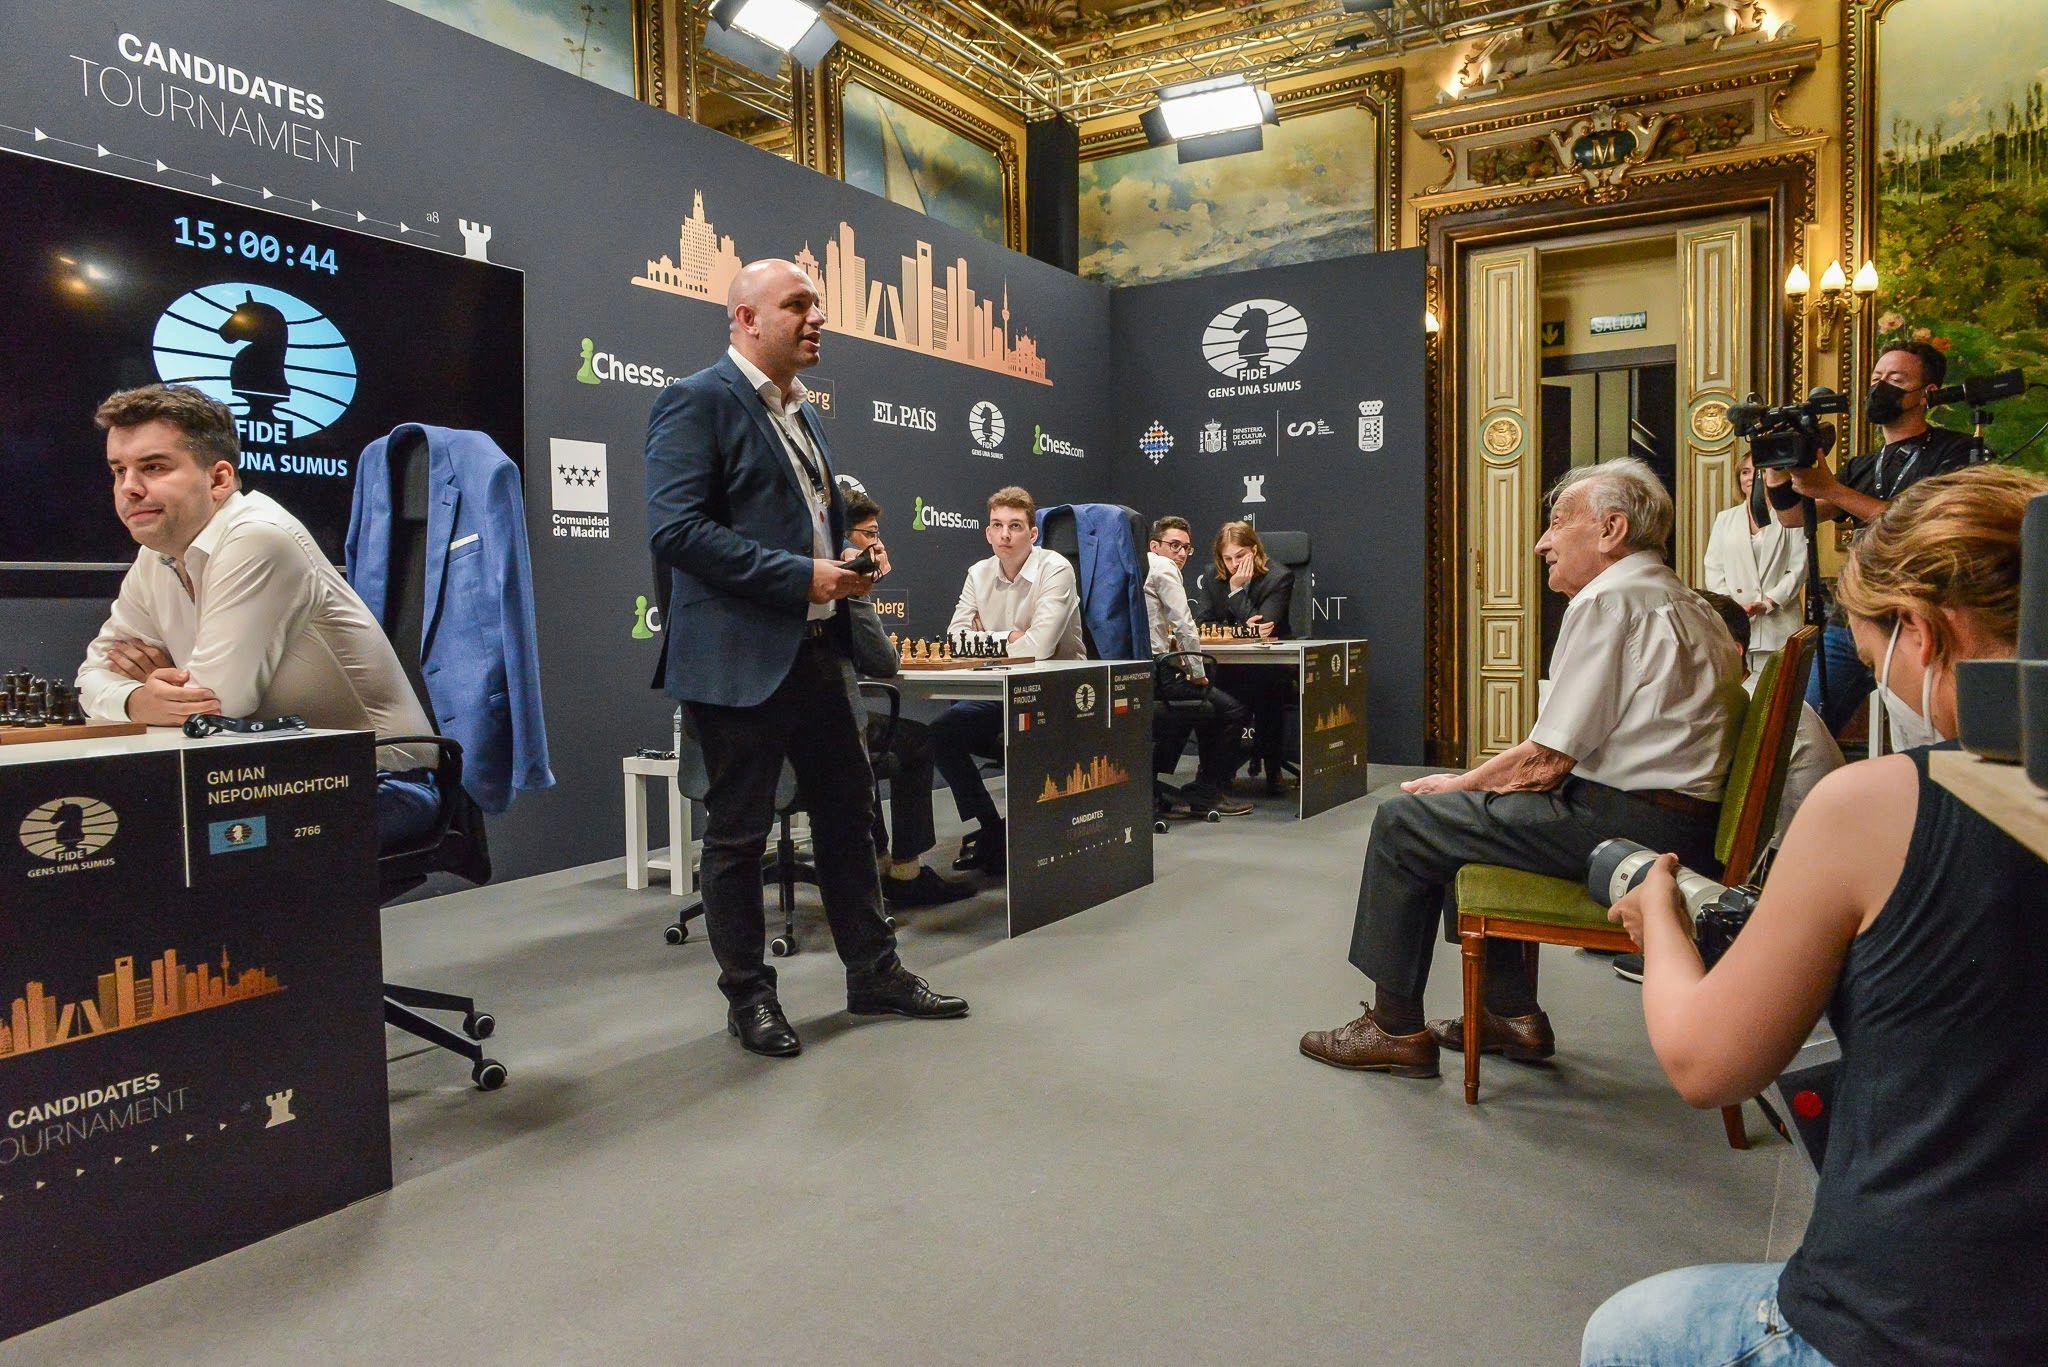 Candidates Tournament to take place in Madrid sponsored by Chess.com